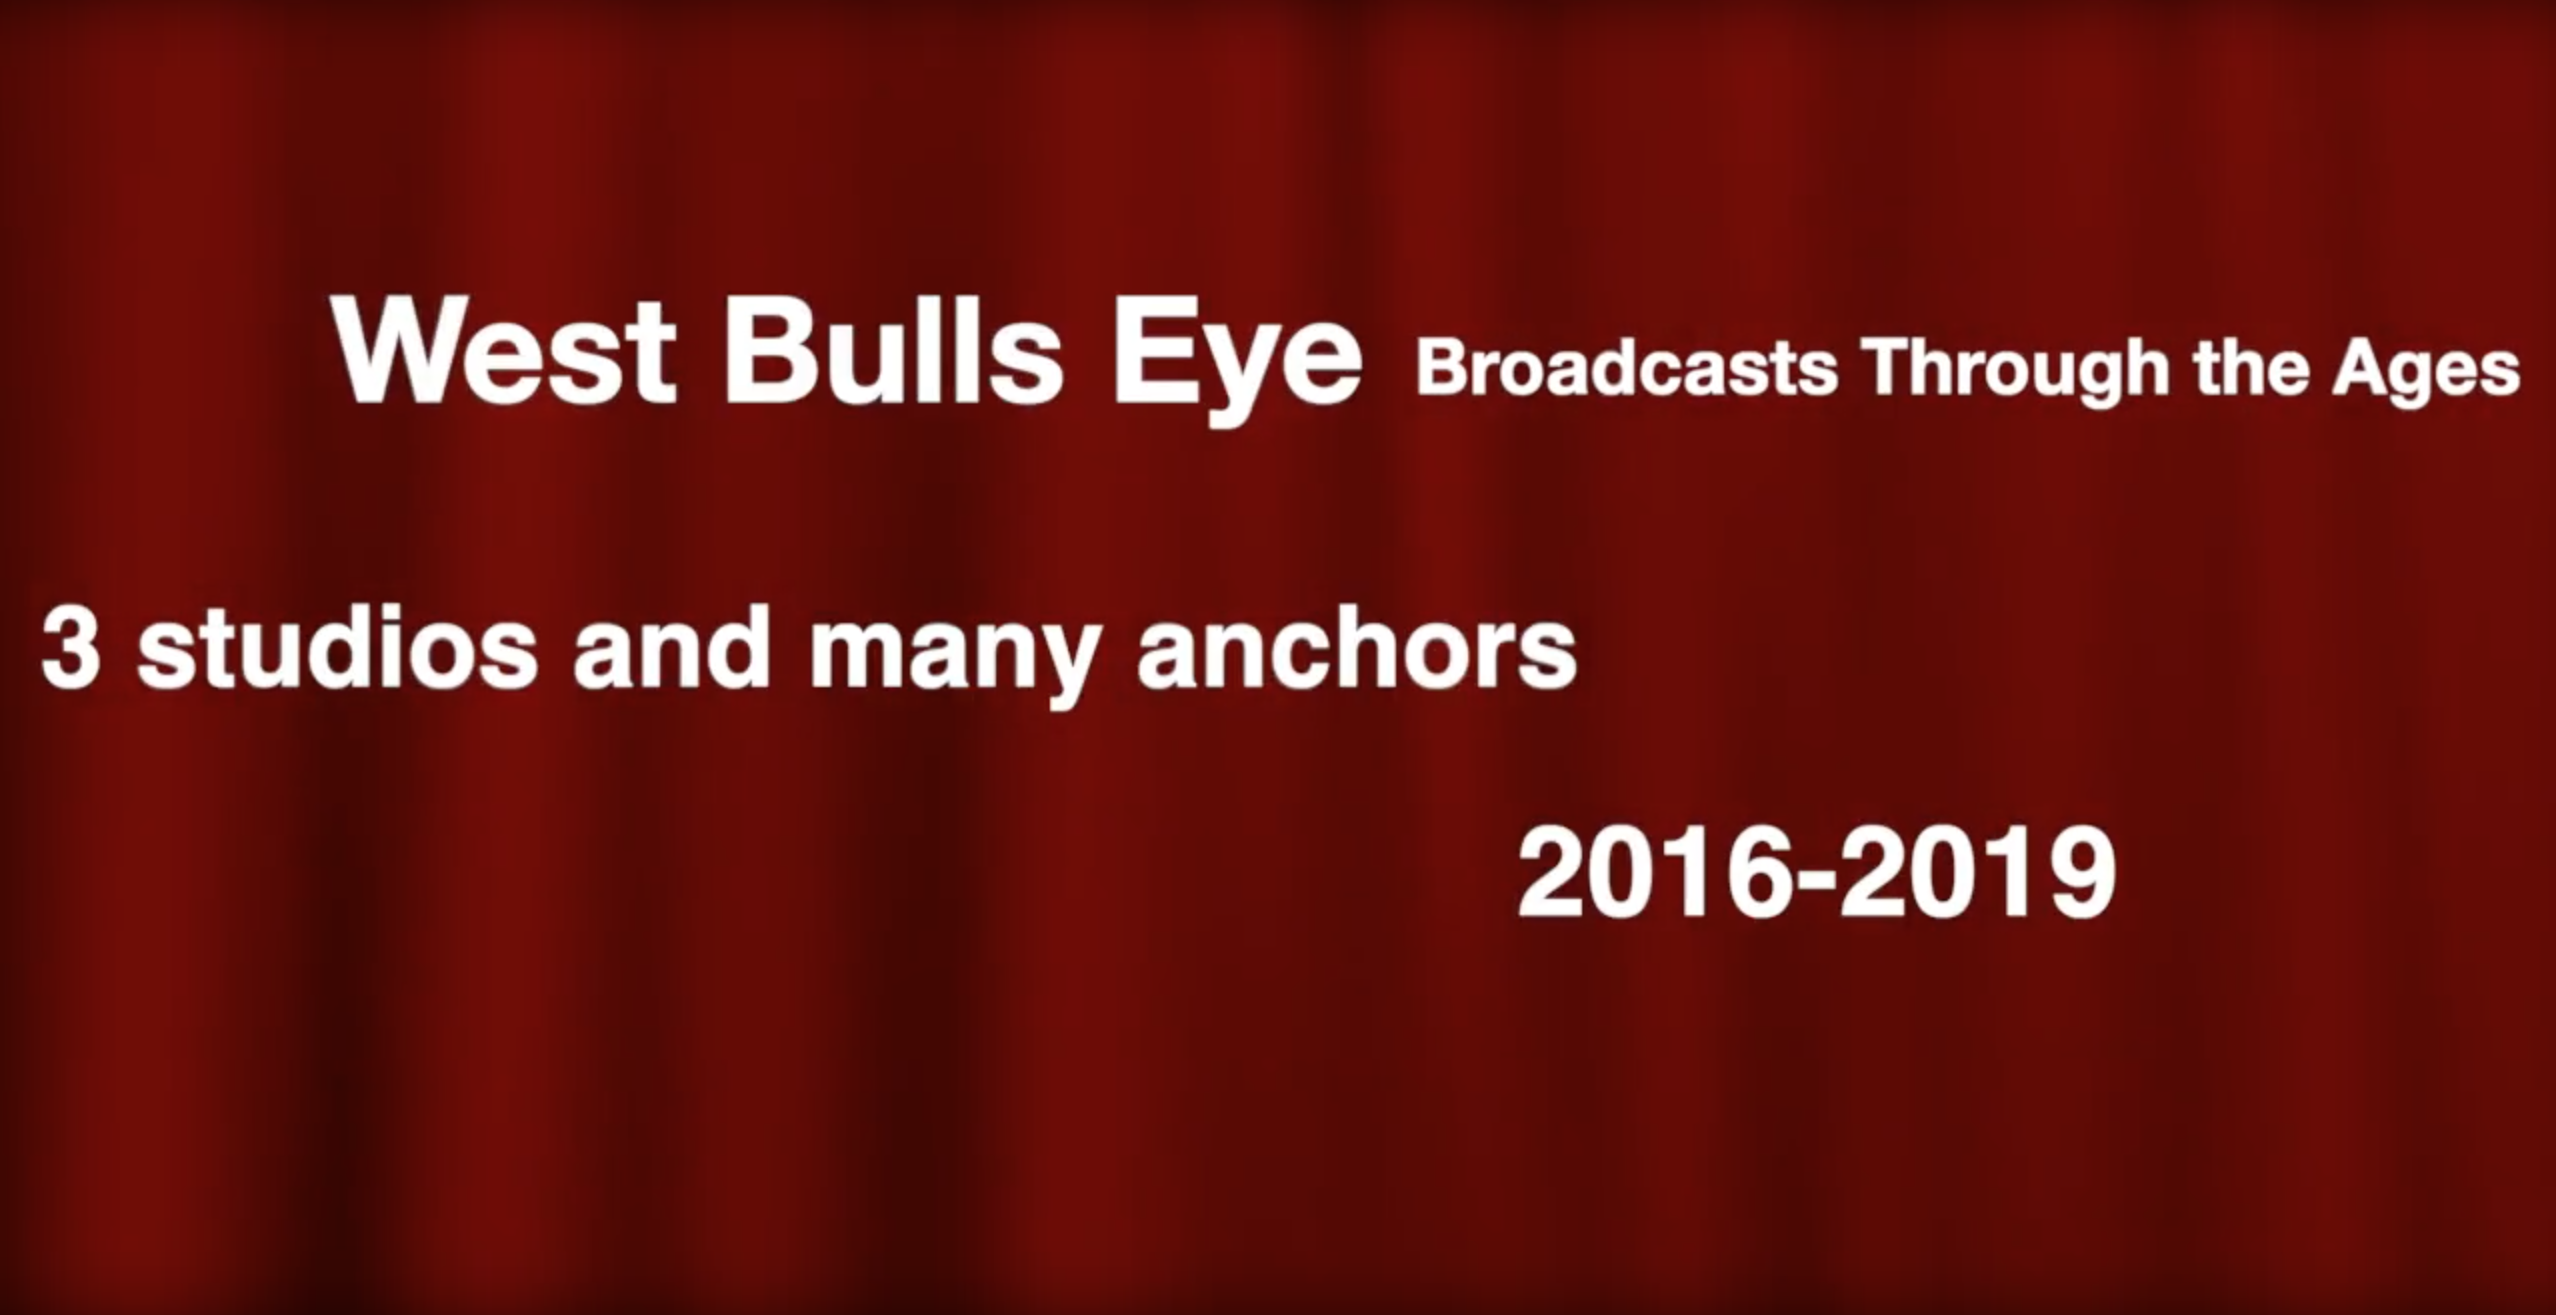 West Bull’s Eye Broadcasts Through the Ages